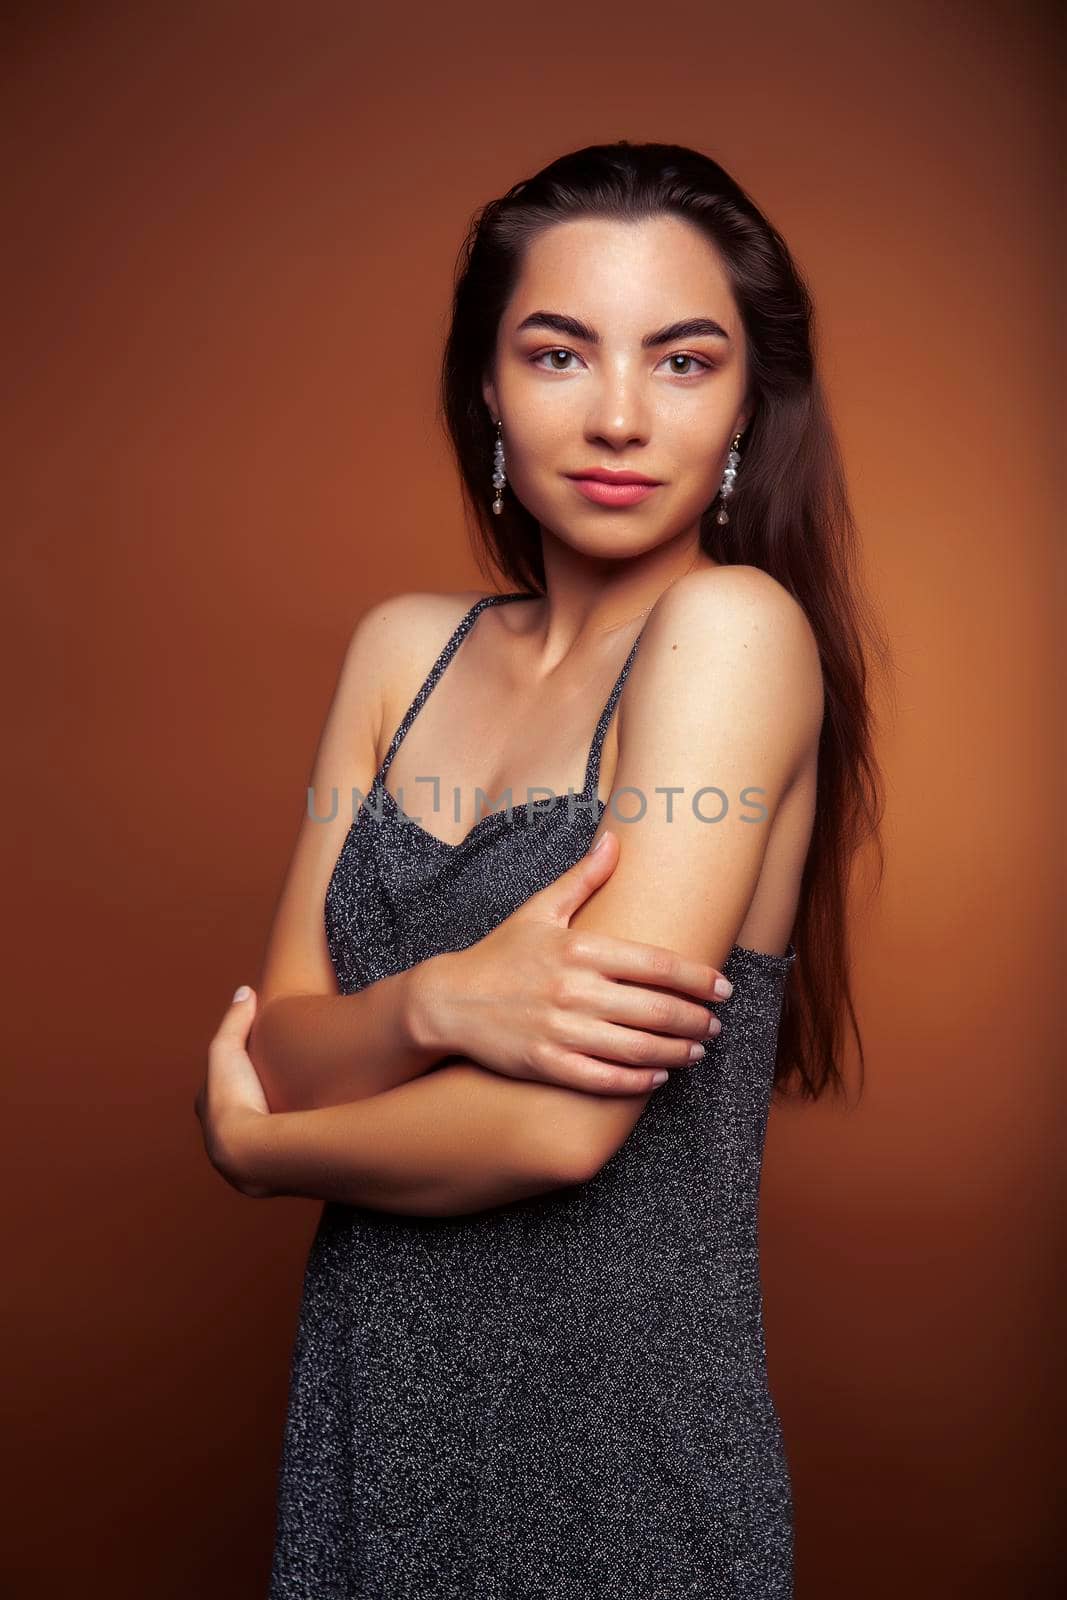 pretty girl happy posing: brunette on brown background, lifestyle people concept by JordanJ